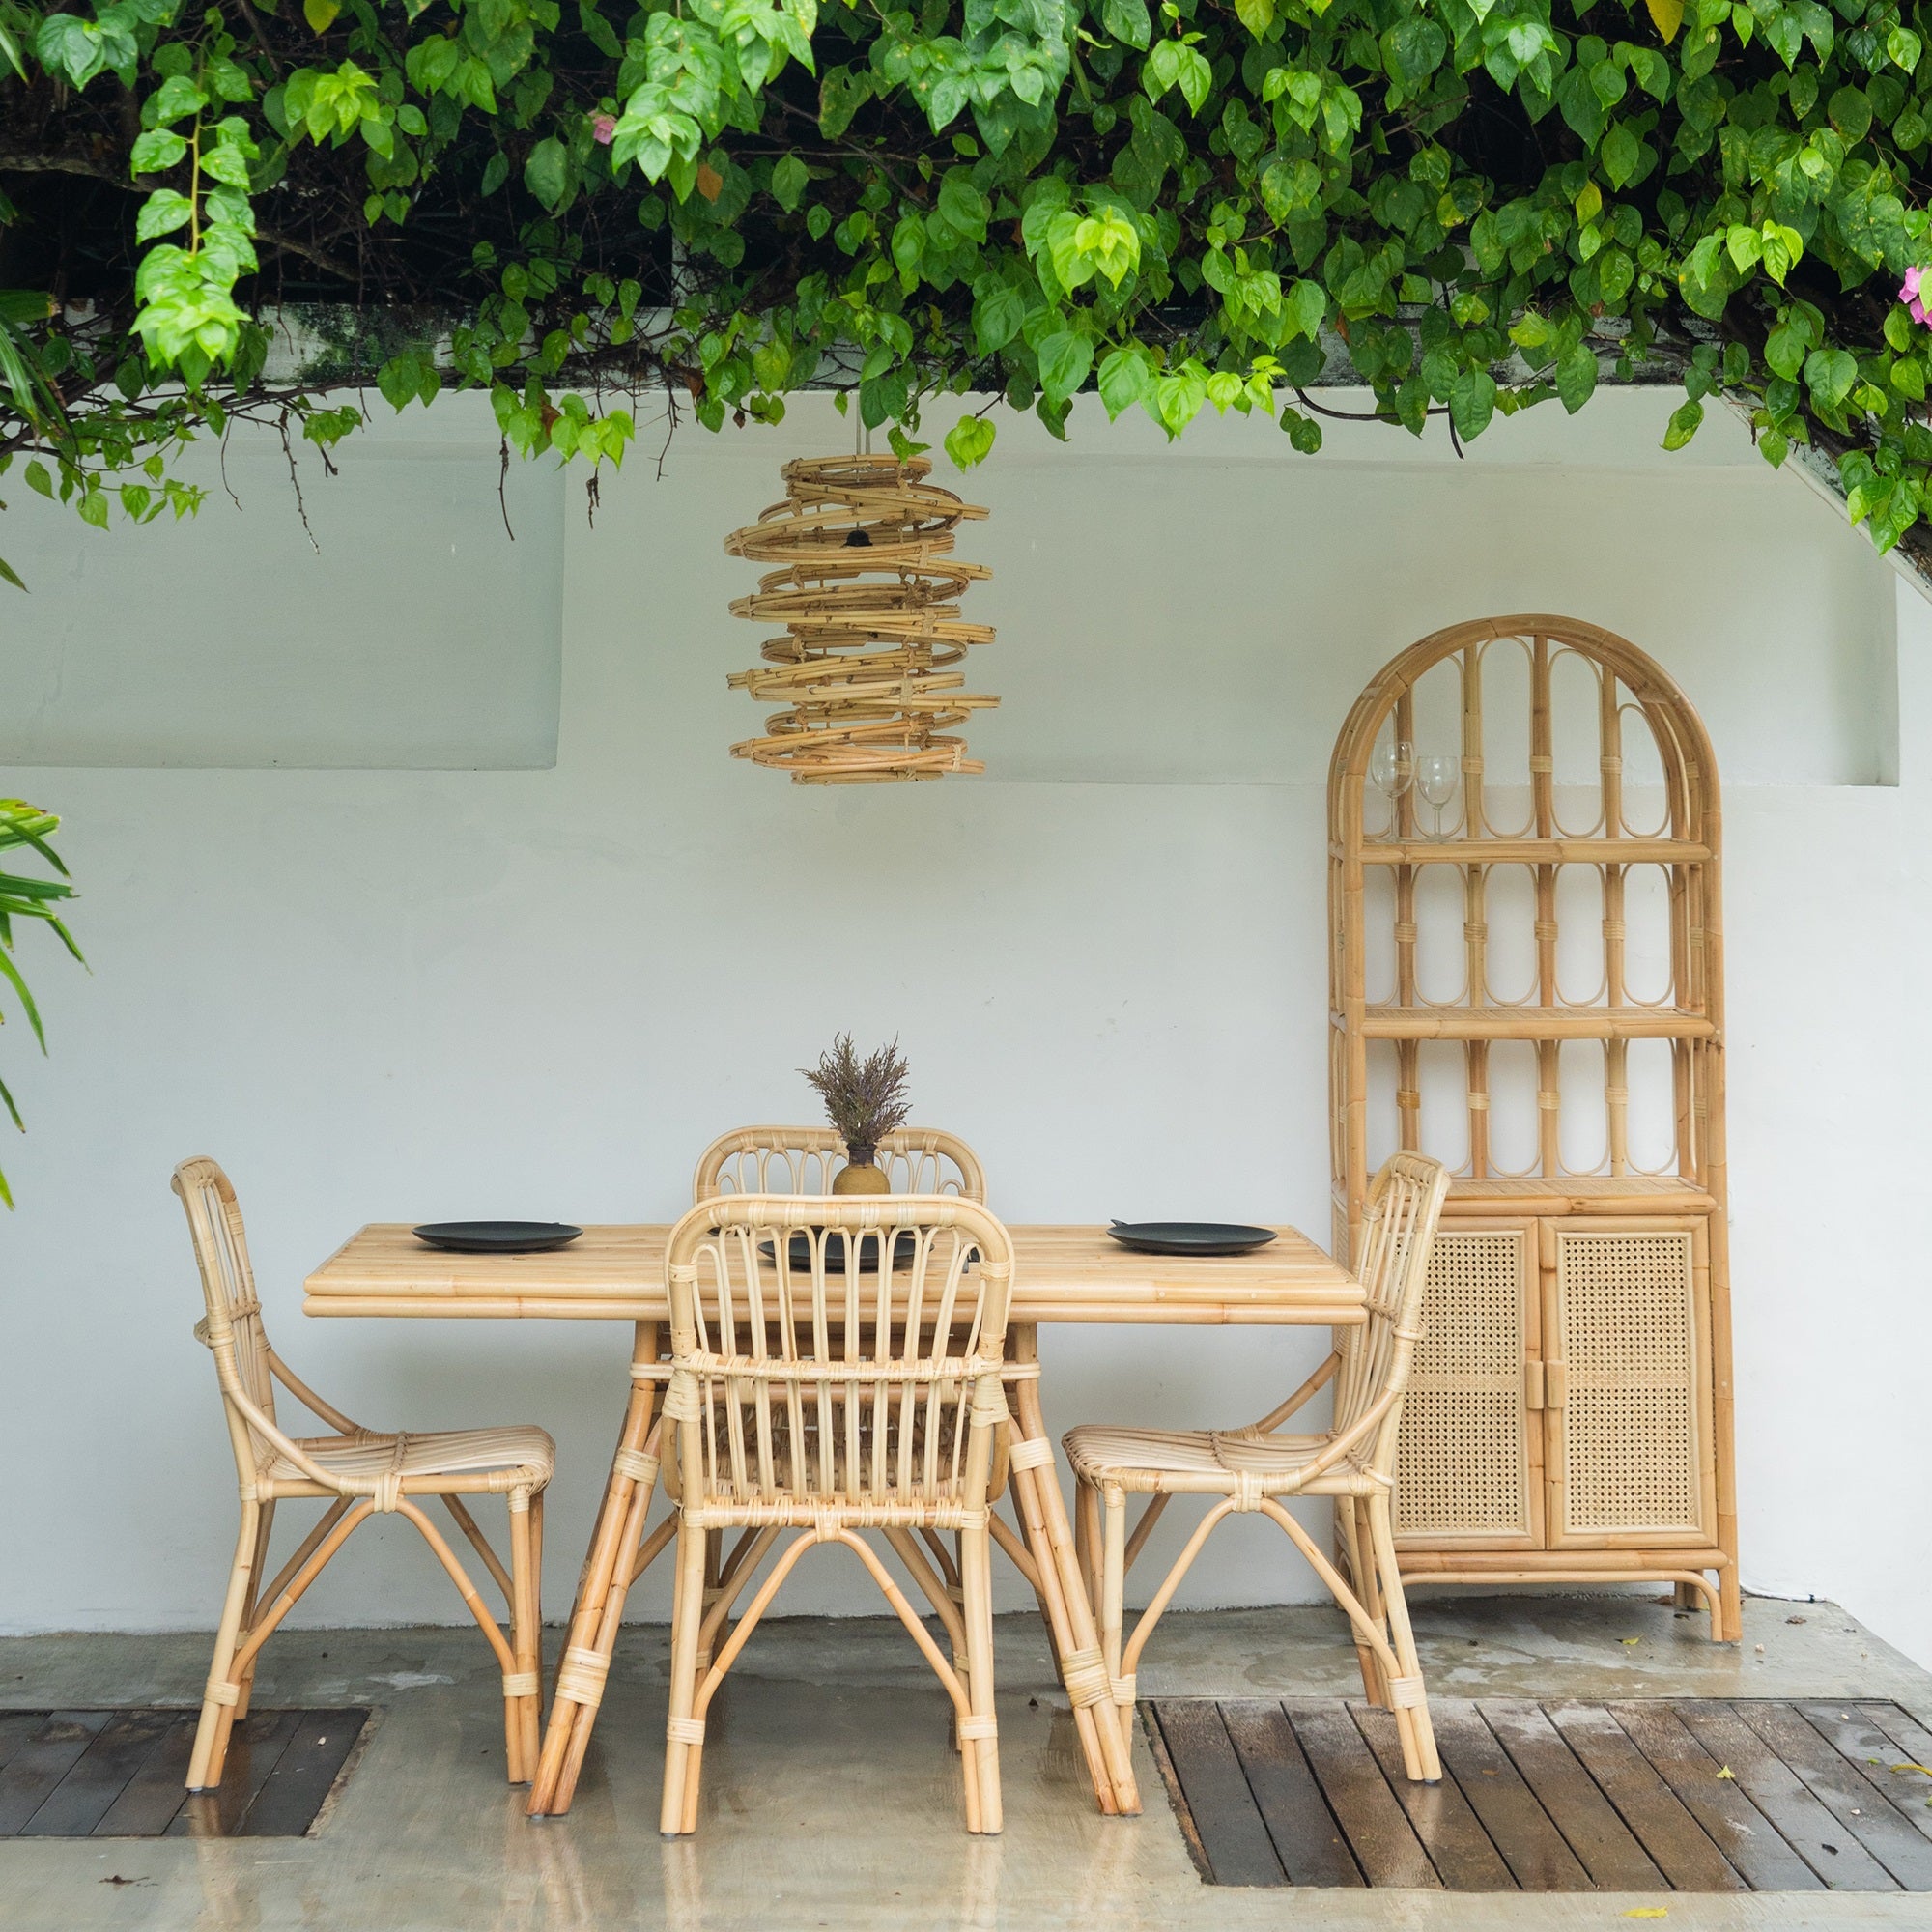 can you leave rattan furniture outside all year round